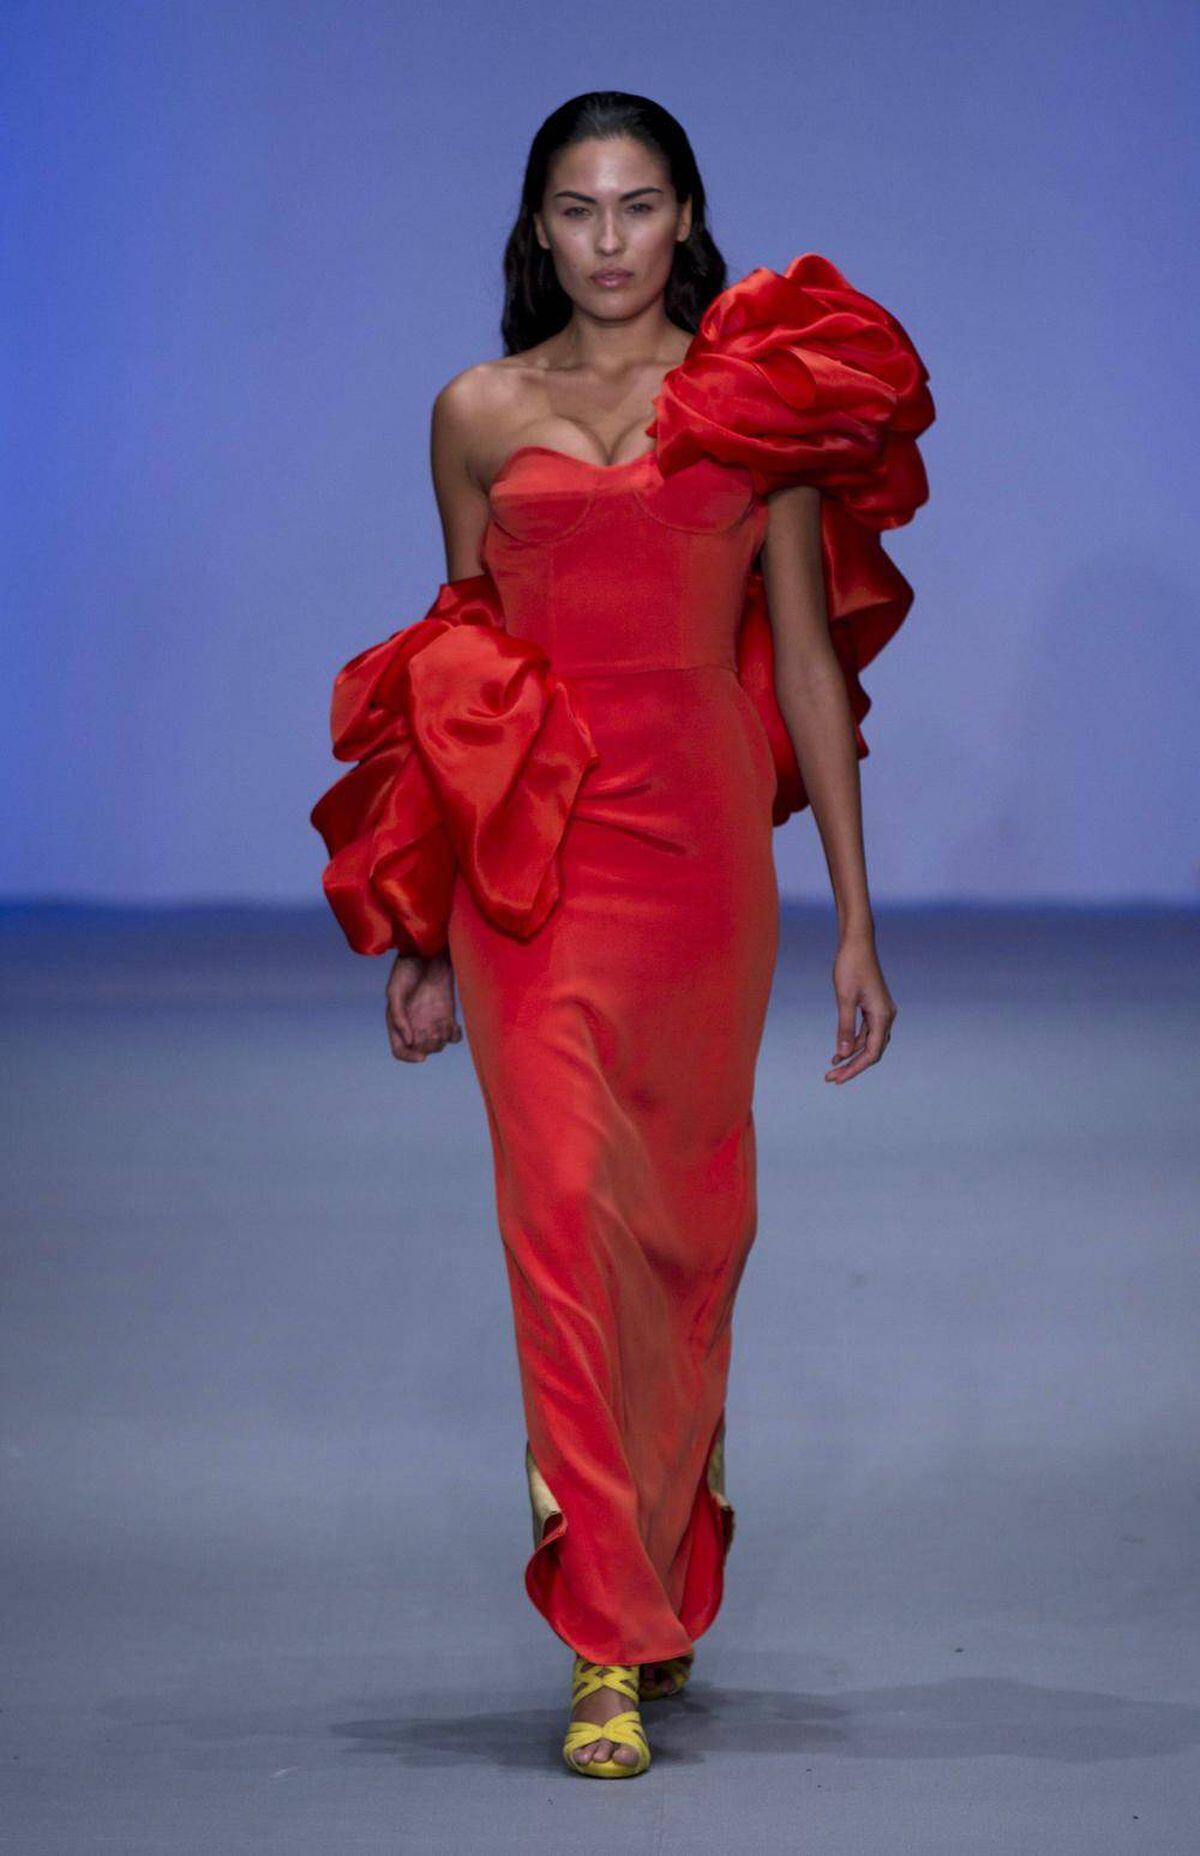 Fashion photos of the week: What's hot in Nairobi and Mexico City - The ...